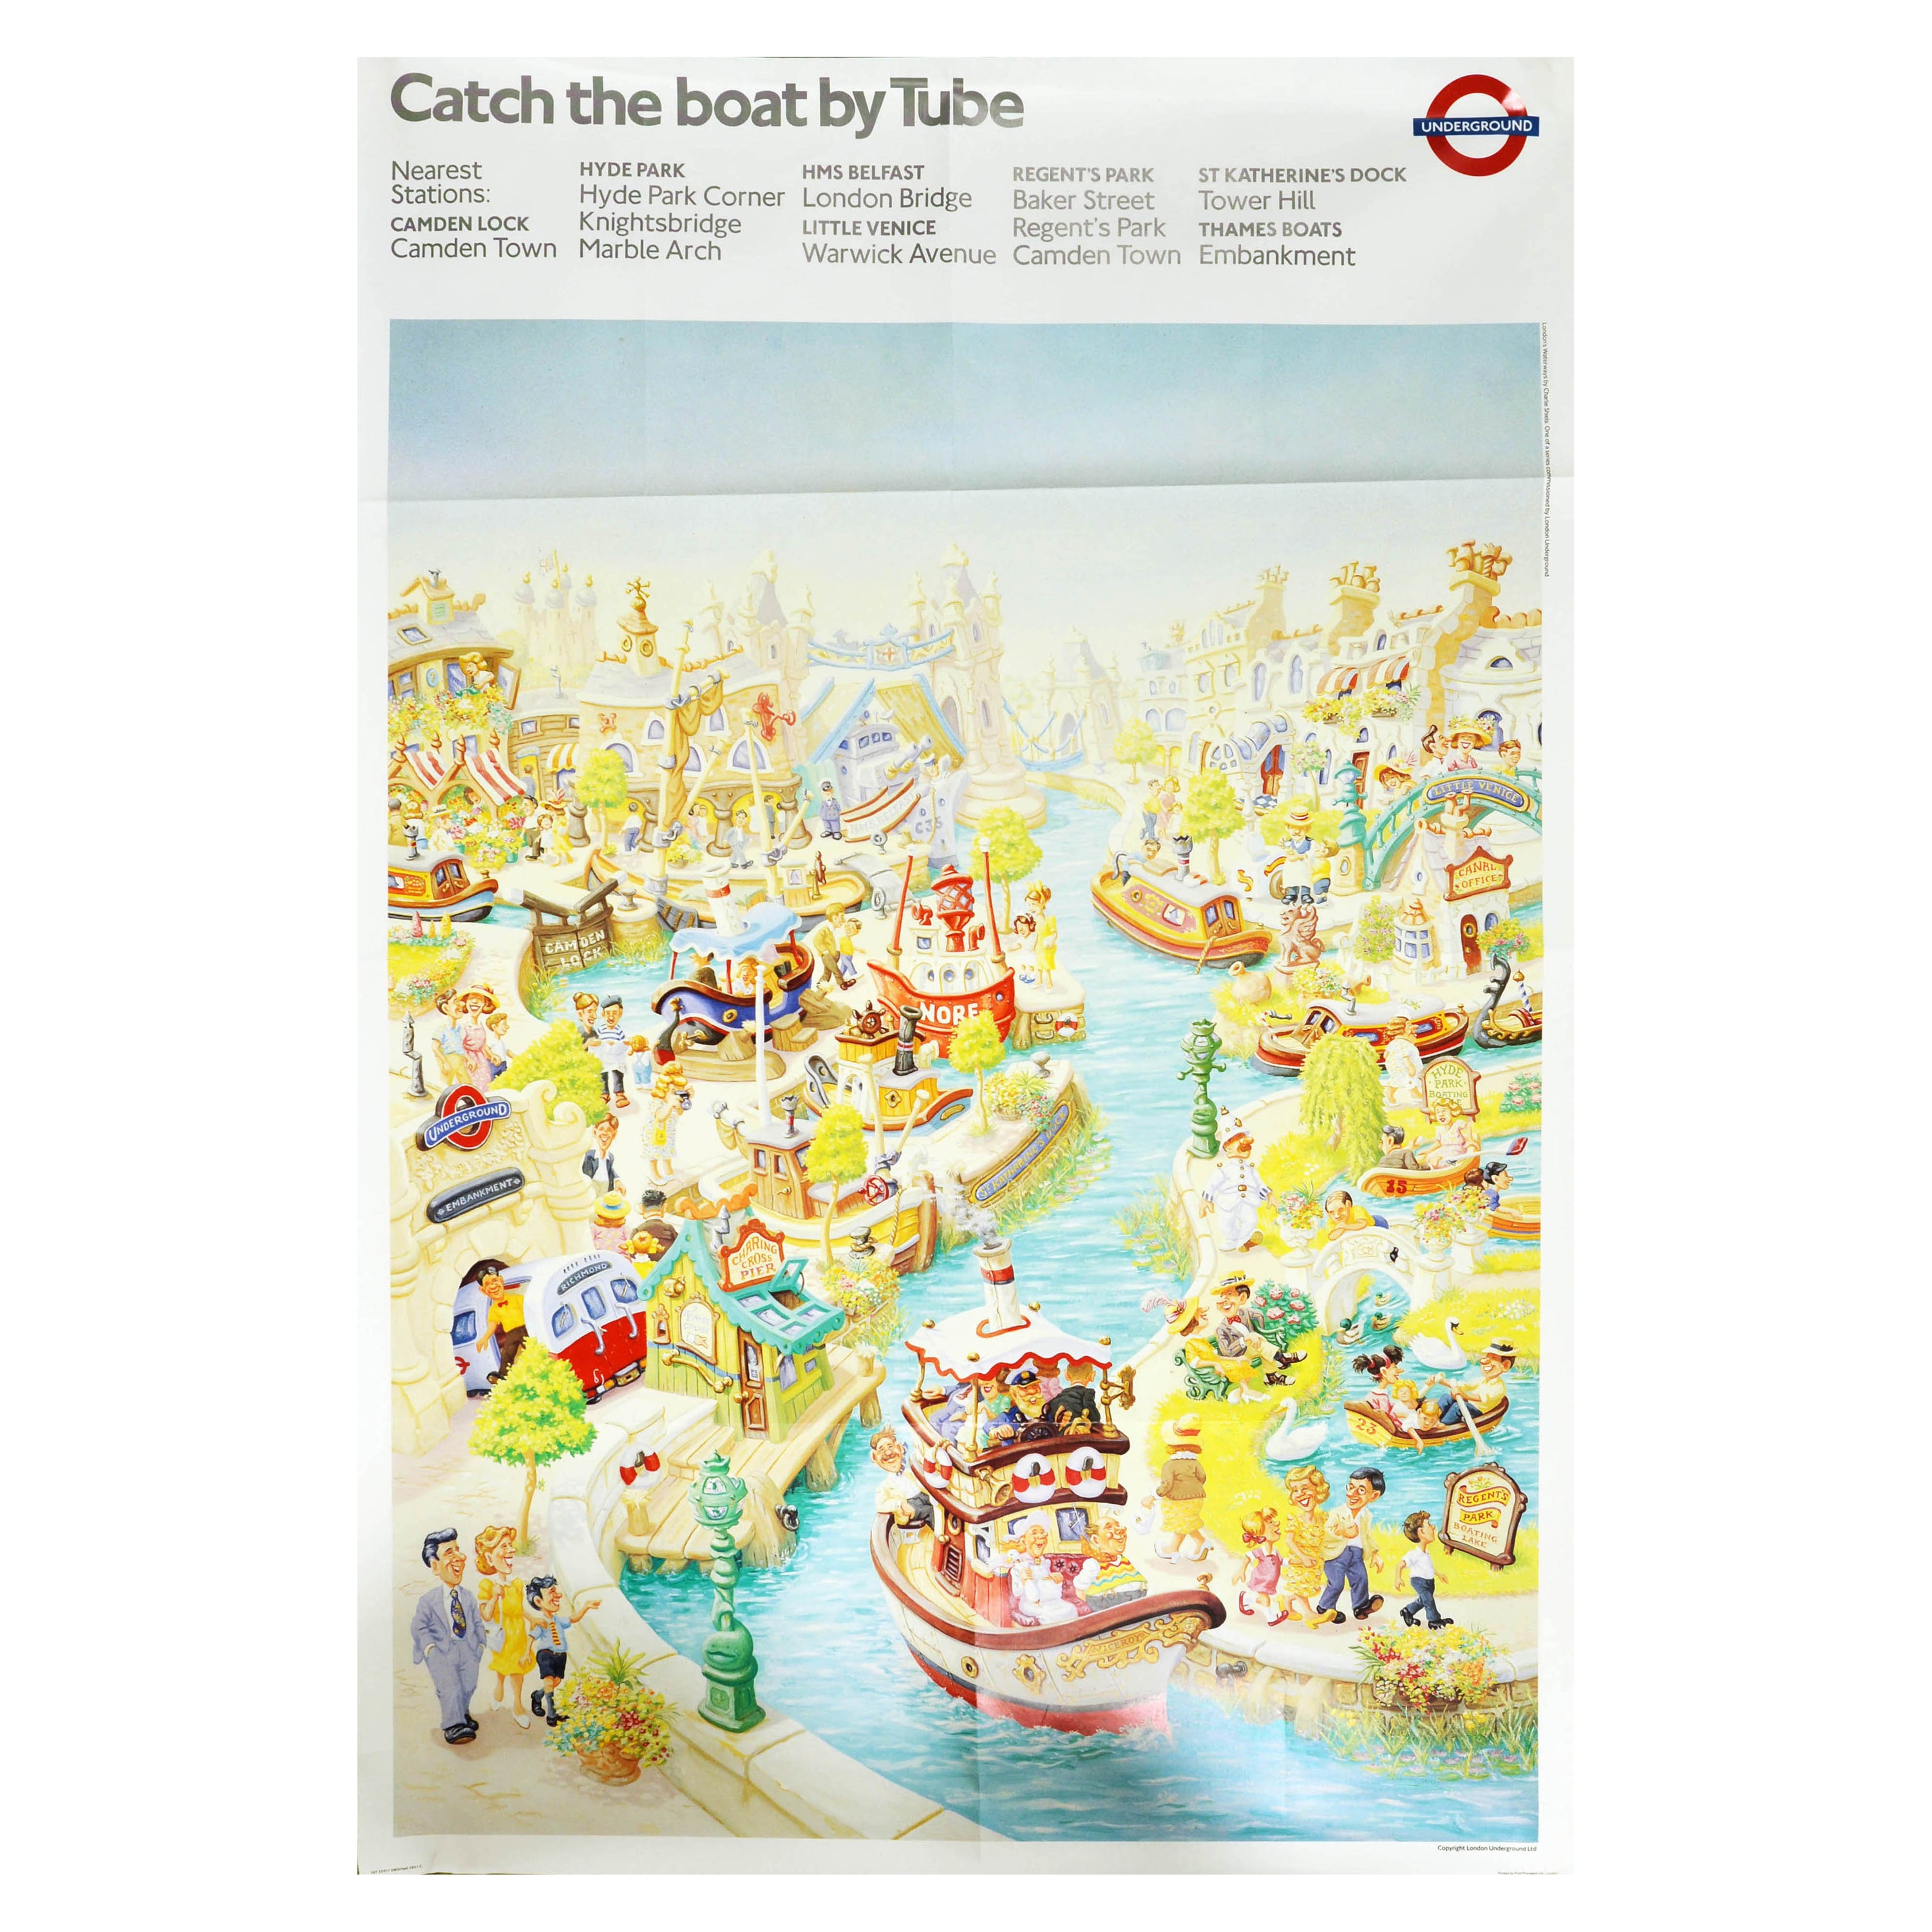 Original Vintage London Underground Poster Catch The Boat By Tube Thames Design For Sale